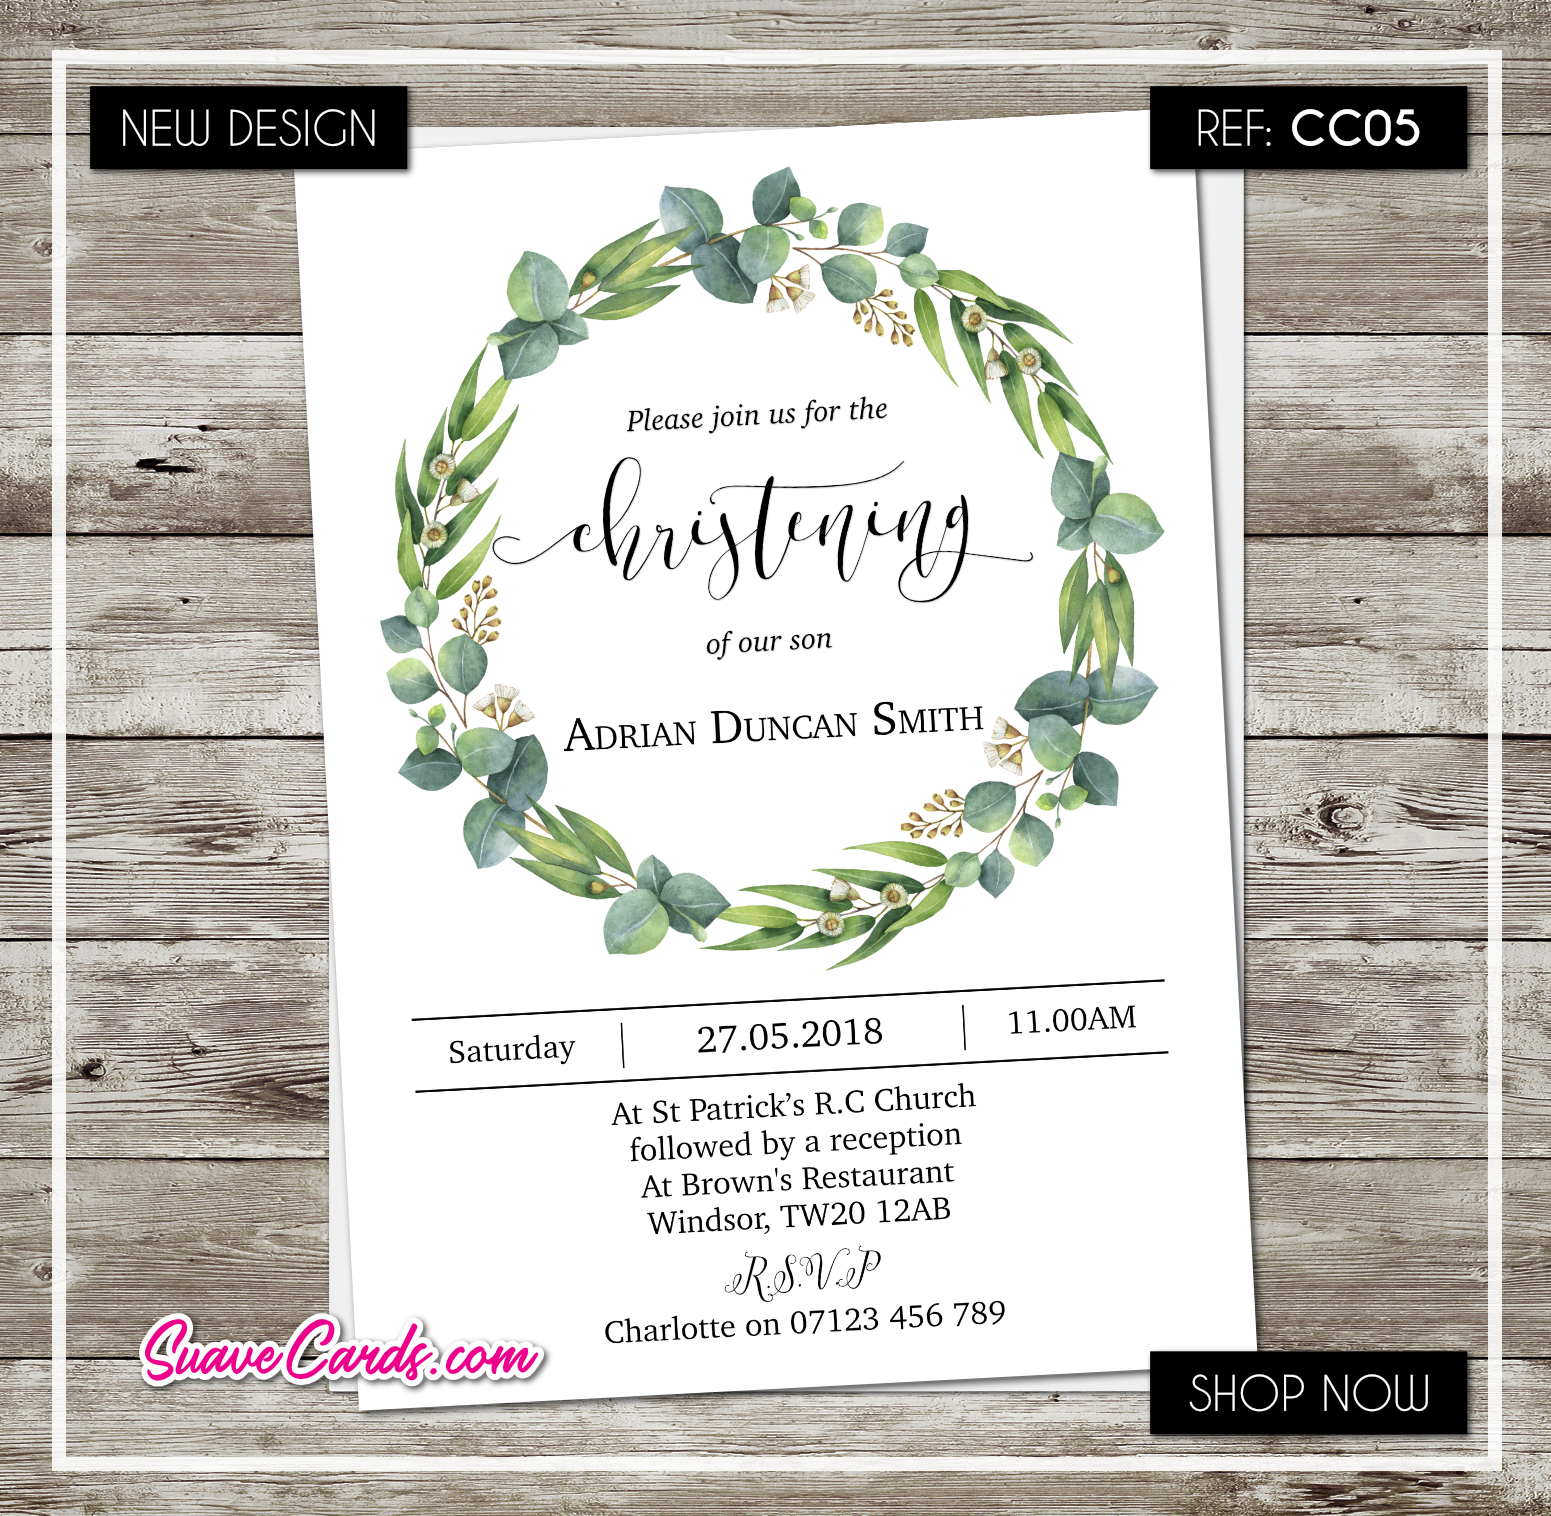 Baptism/Christening – Eucalyptus Wreath (for any occasion)